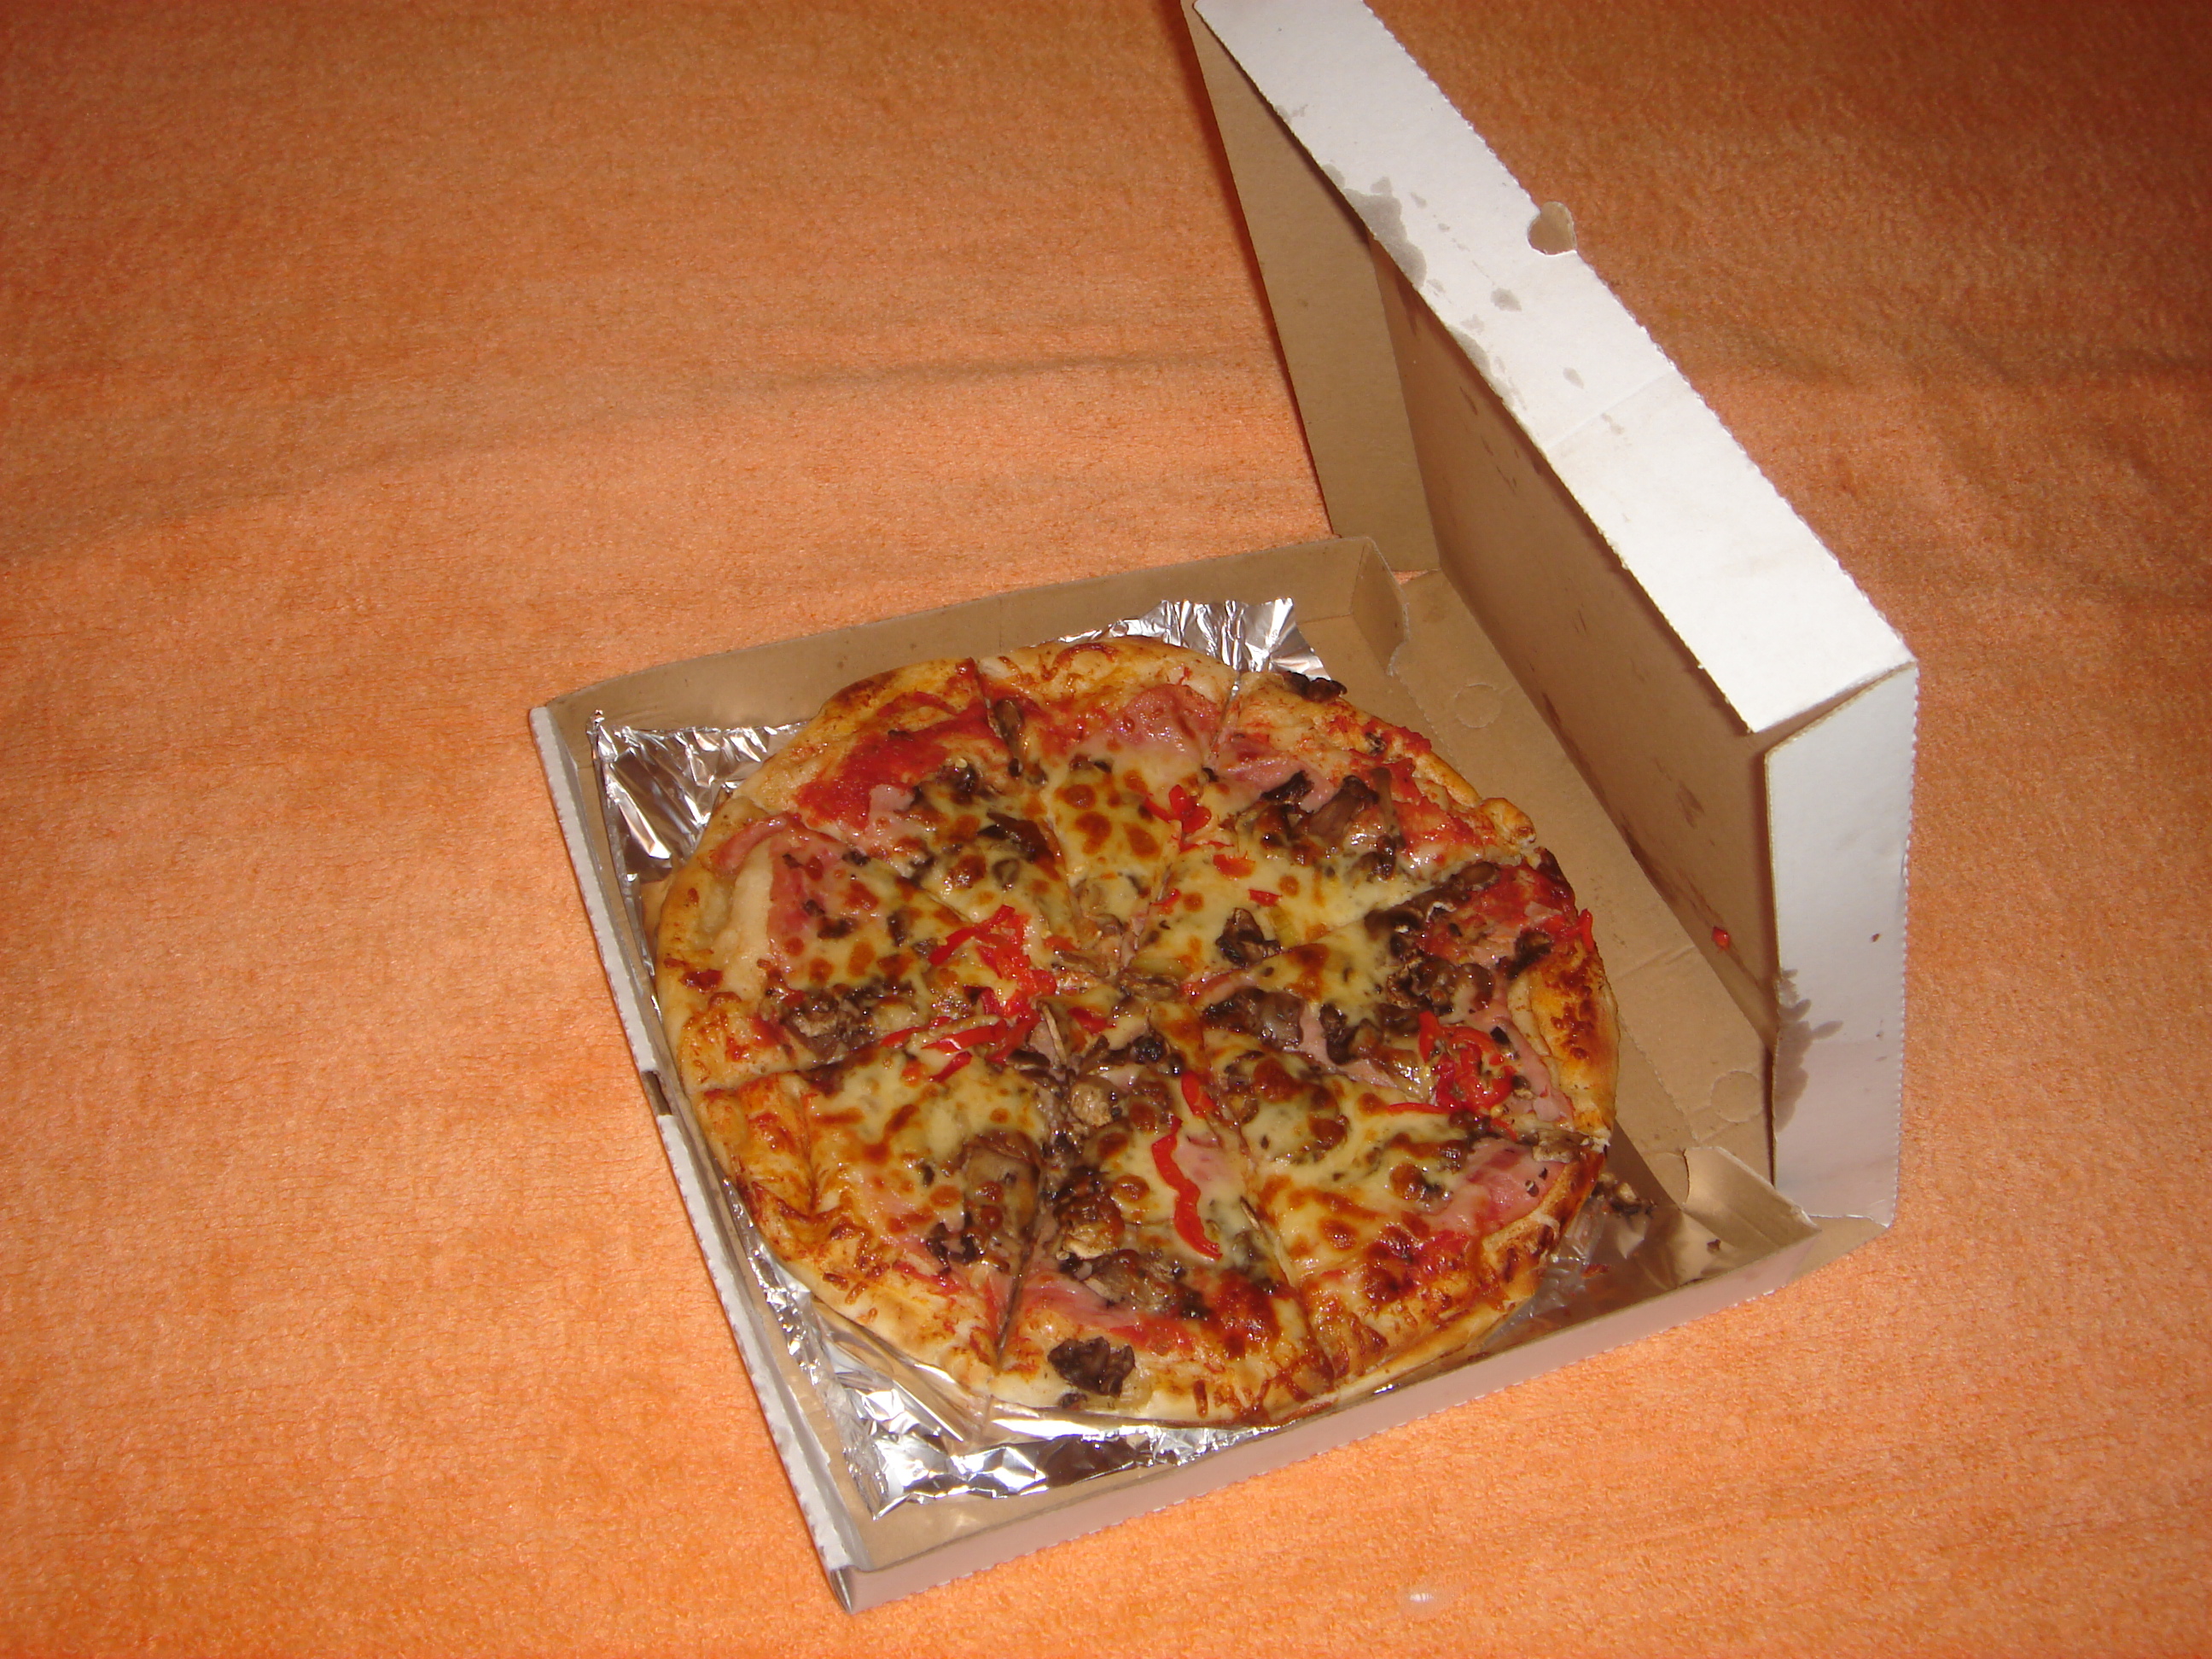 Pizza Toscana in a box